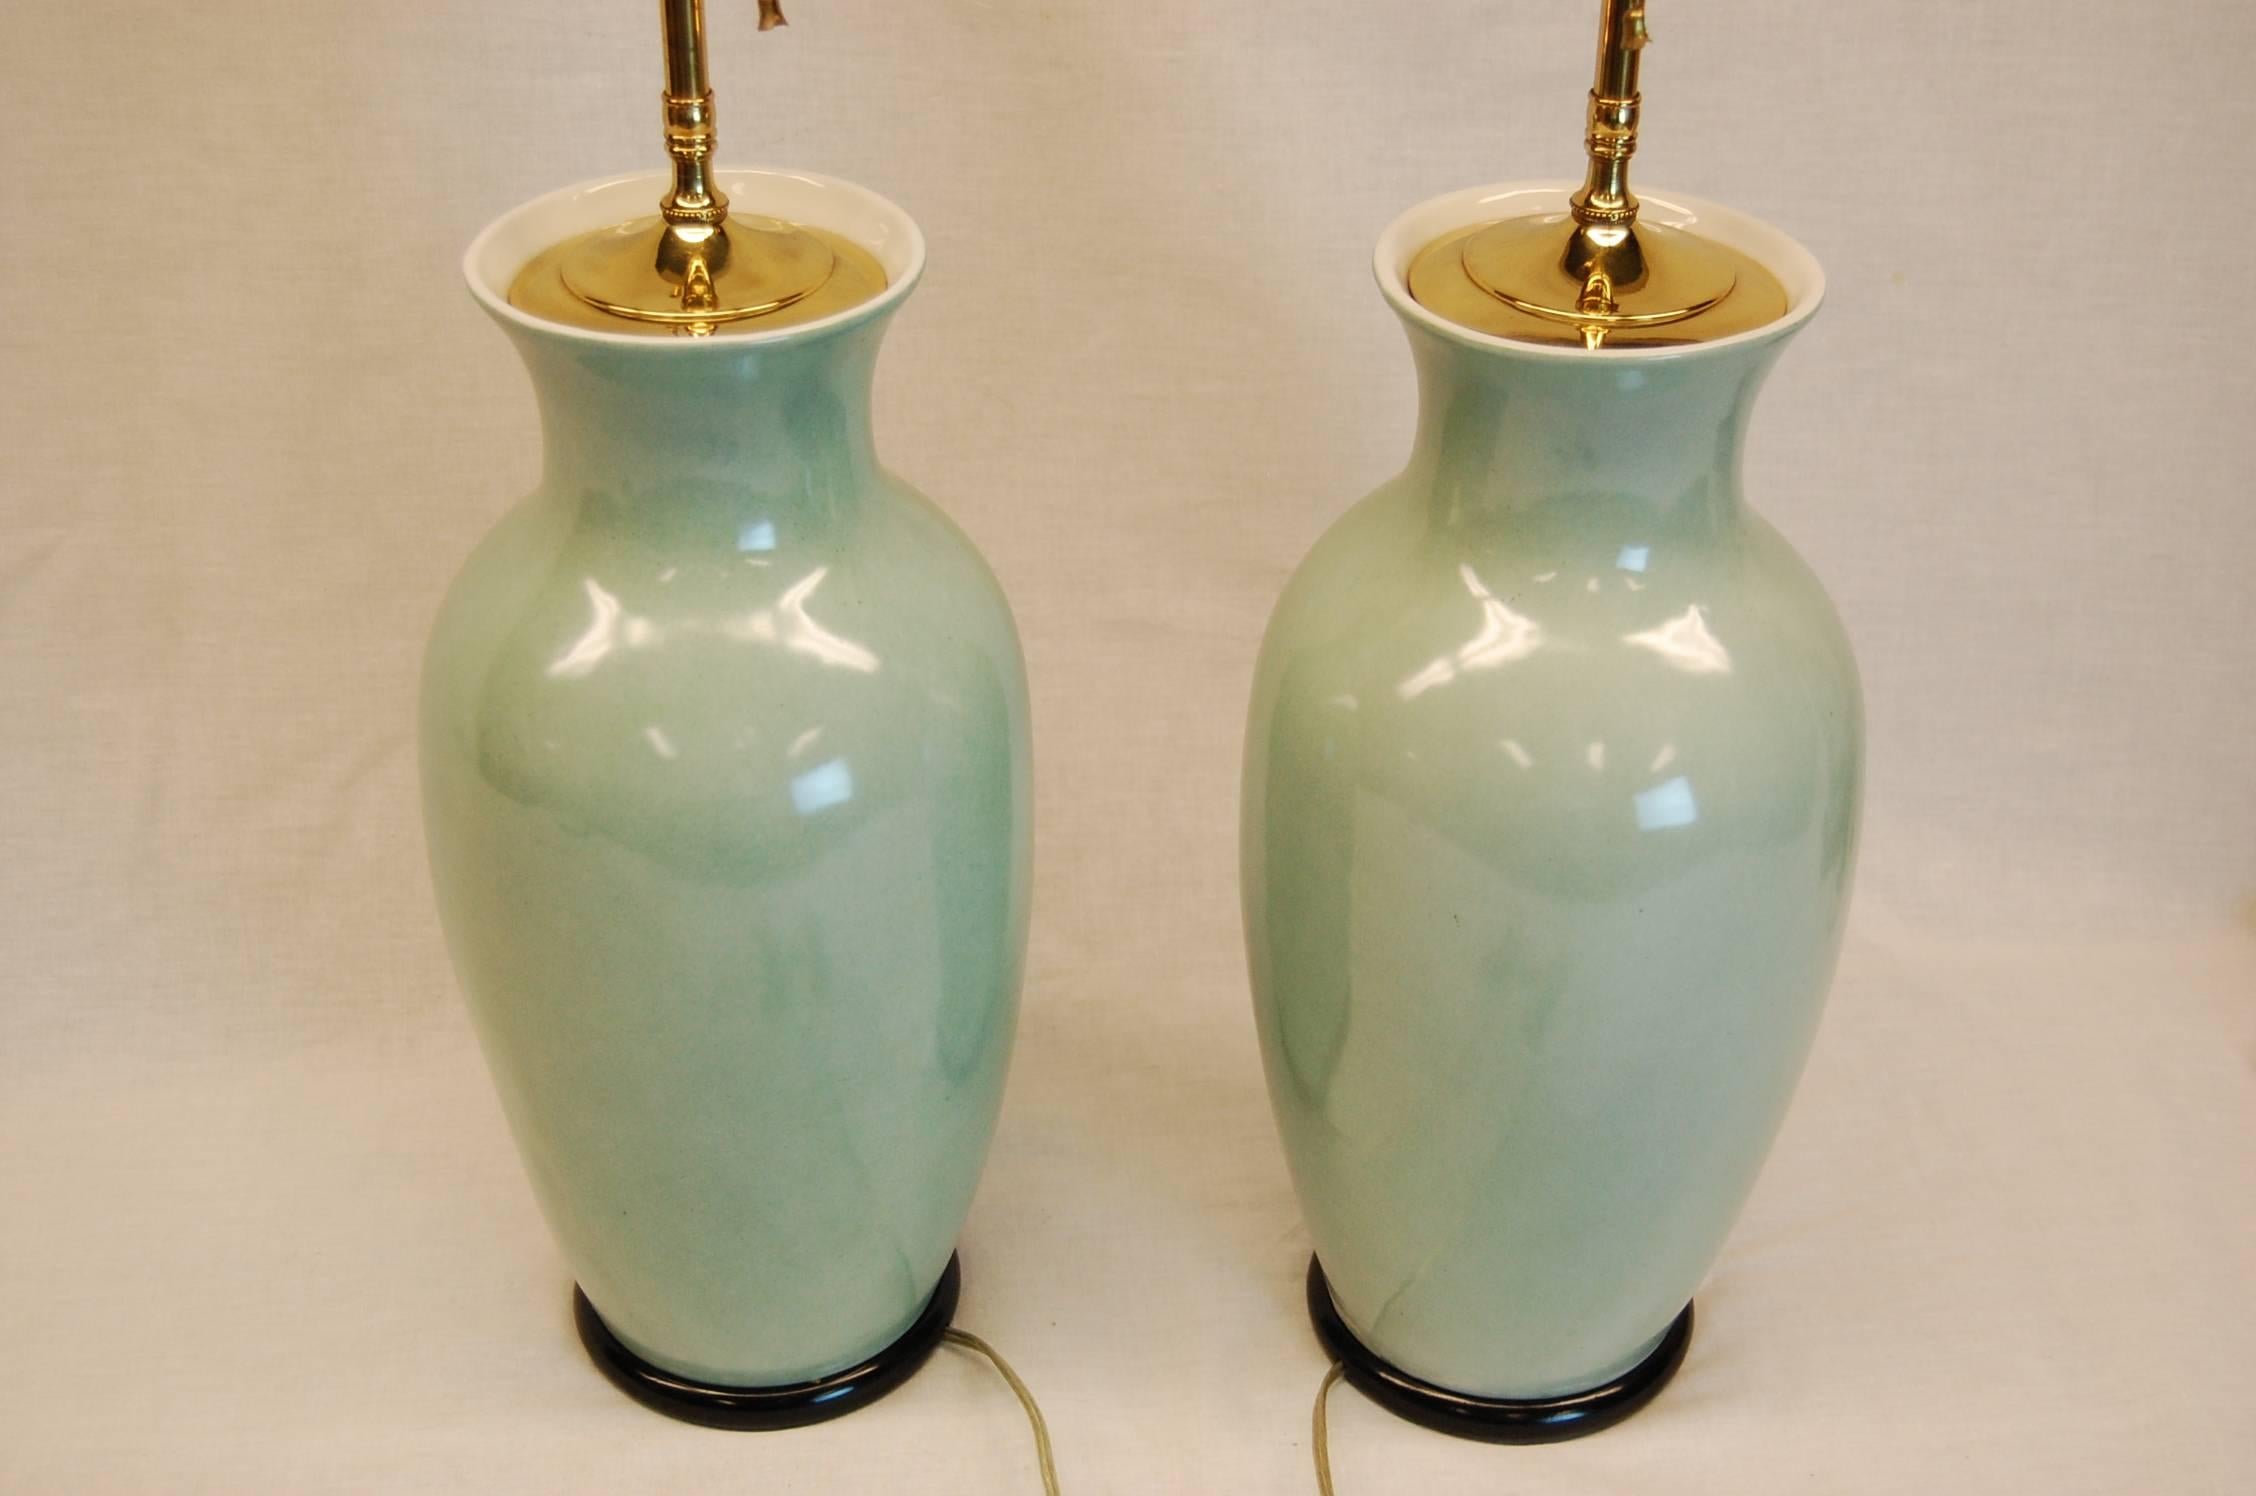 Hand-Crafted Pair of Early 20th Century Pale Celadon Chinese Urns Wired as Lamps